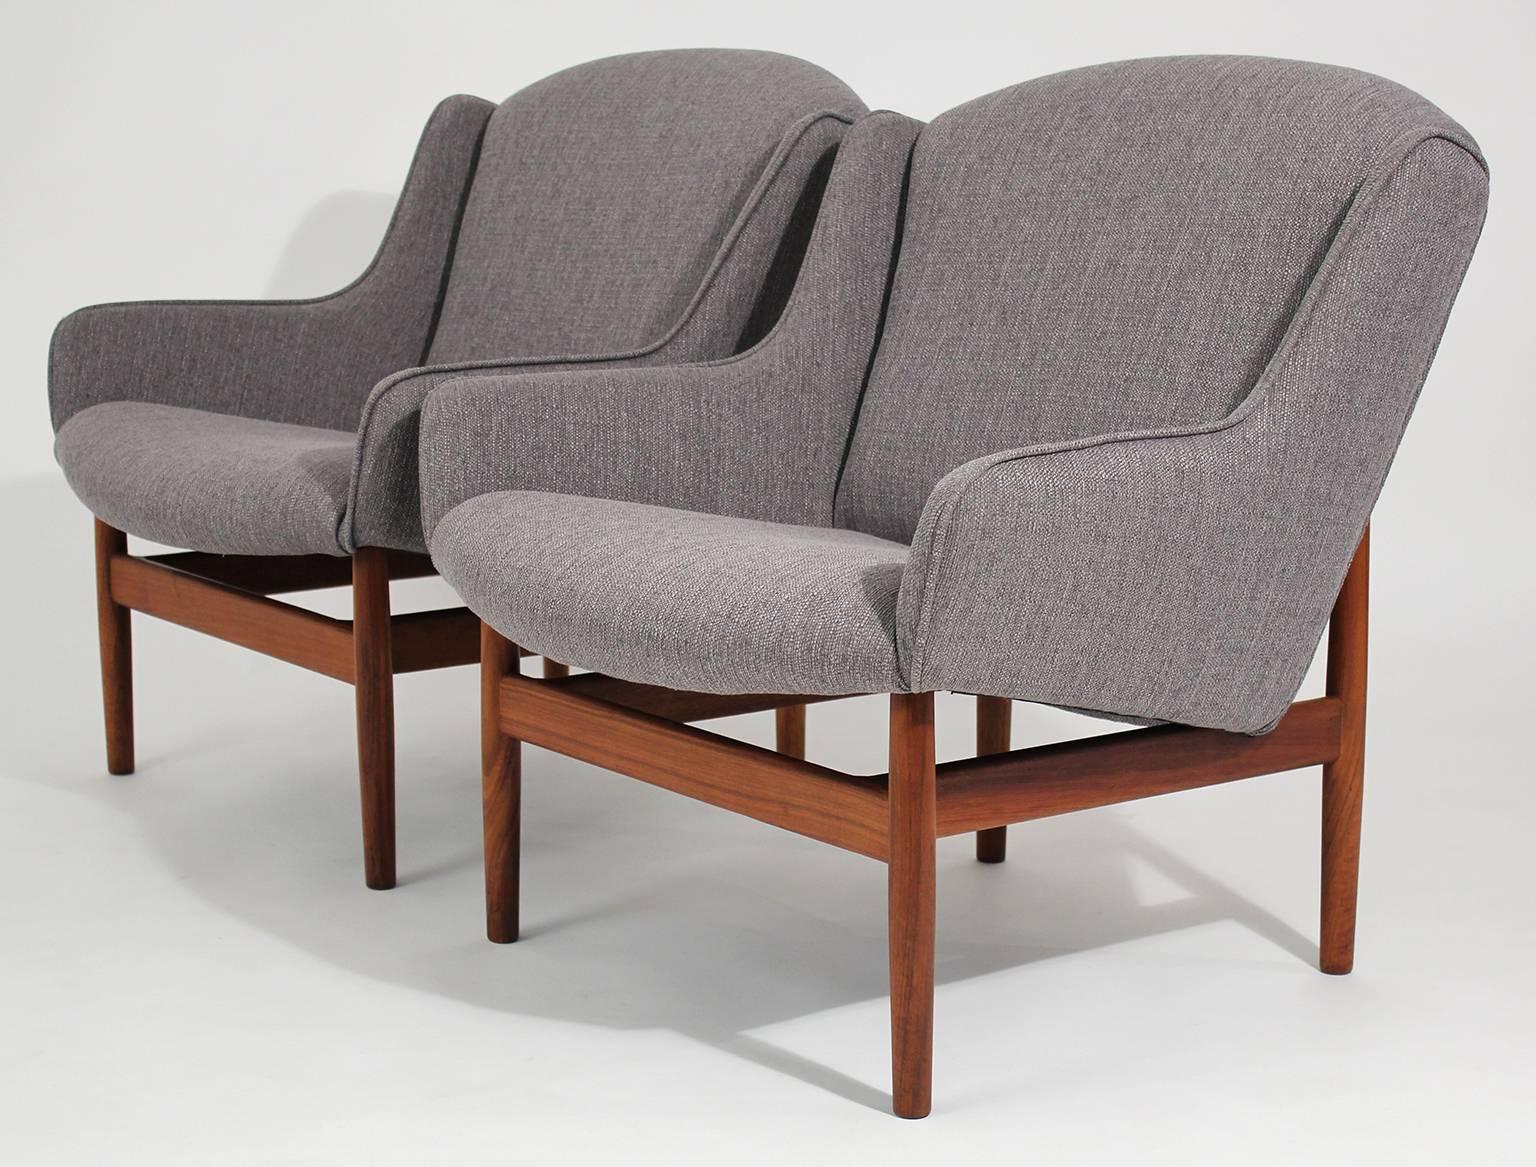 Mid-Century Modern Jens Risom Pair of Lounge Chairs for Jens Risom Design, Inc.